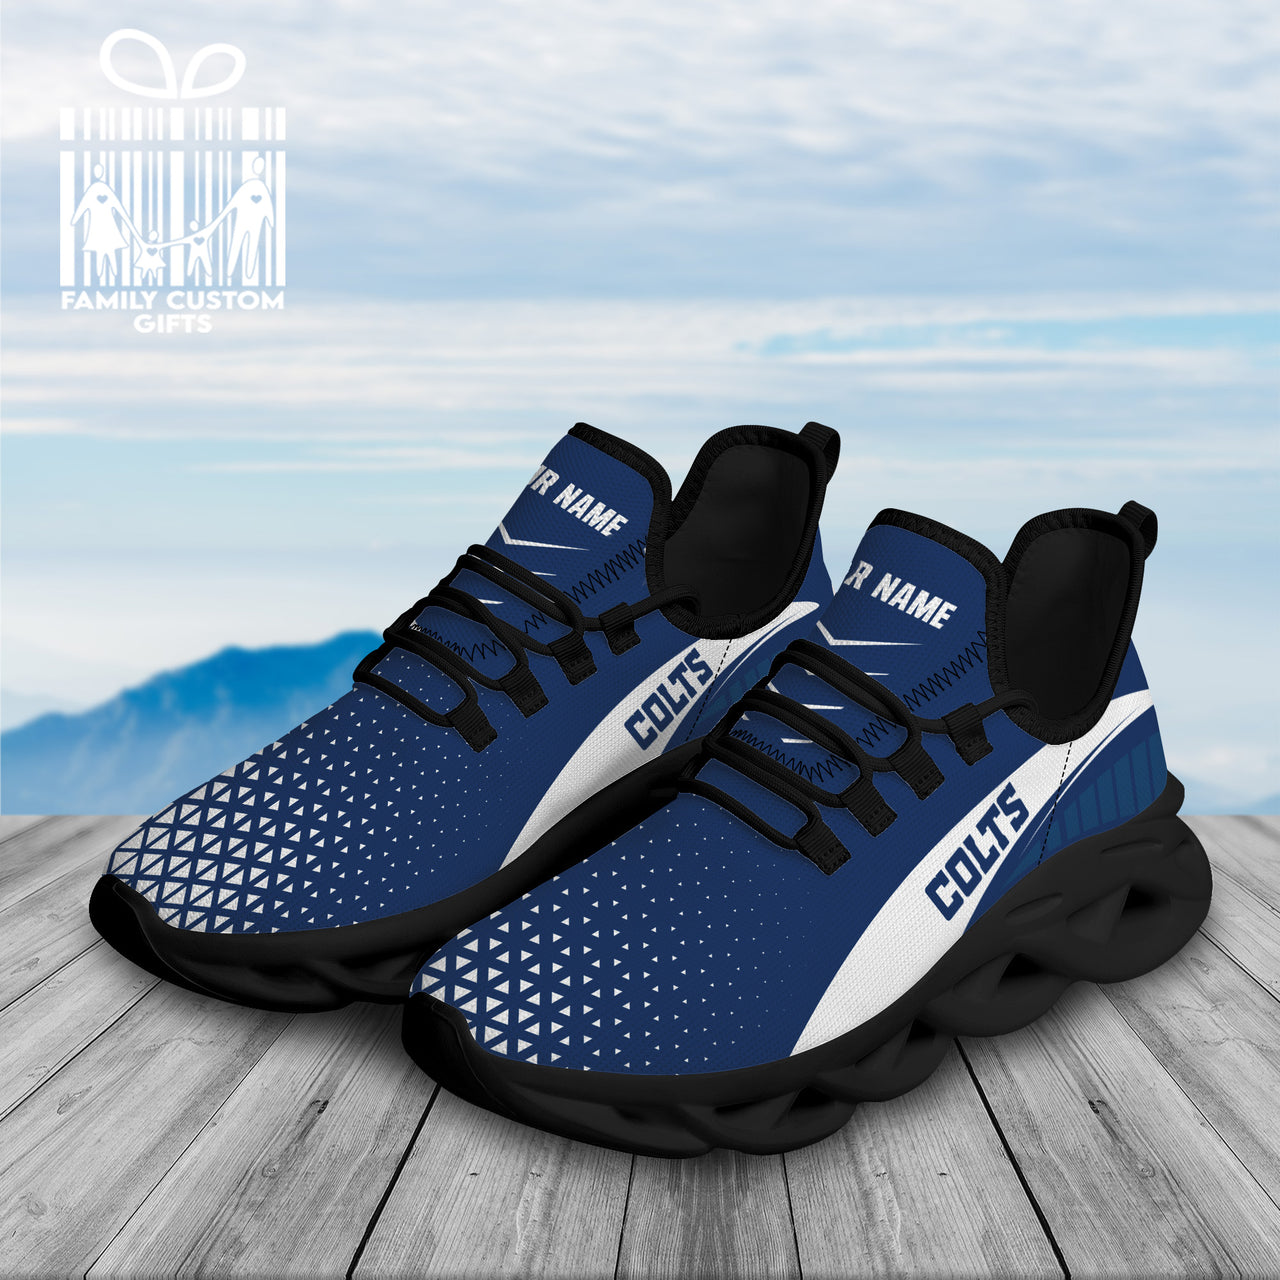 Indianapolis Colts Custom Personalized Max Soul Sneakers Running Sport Shoes for Men Women